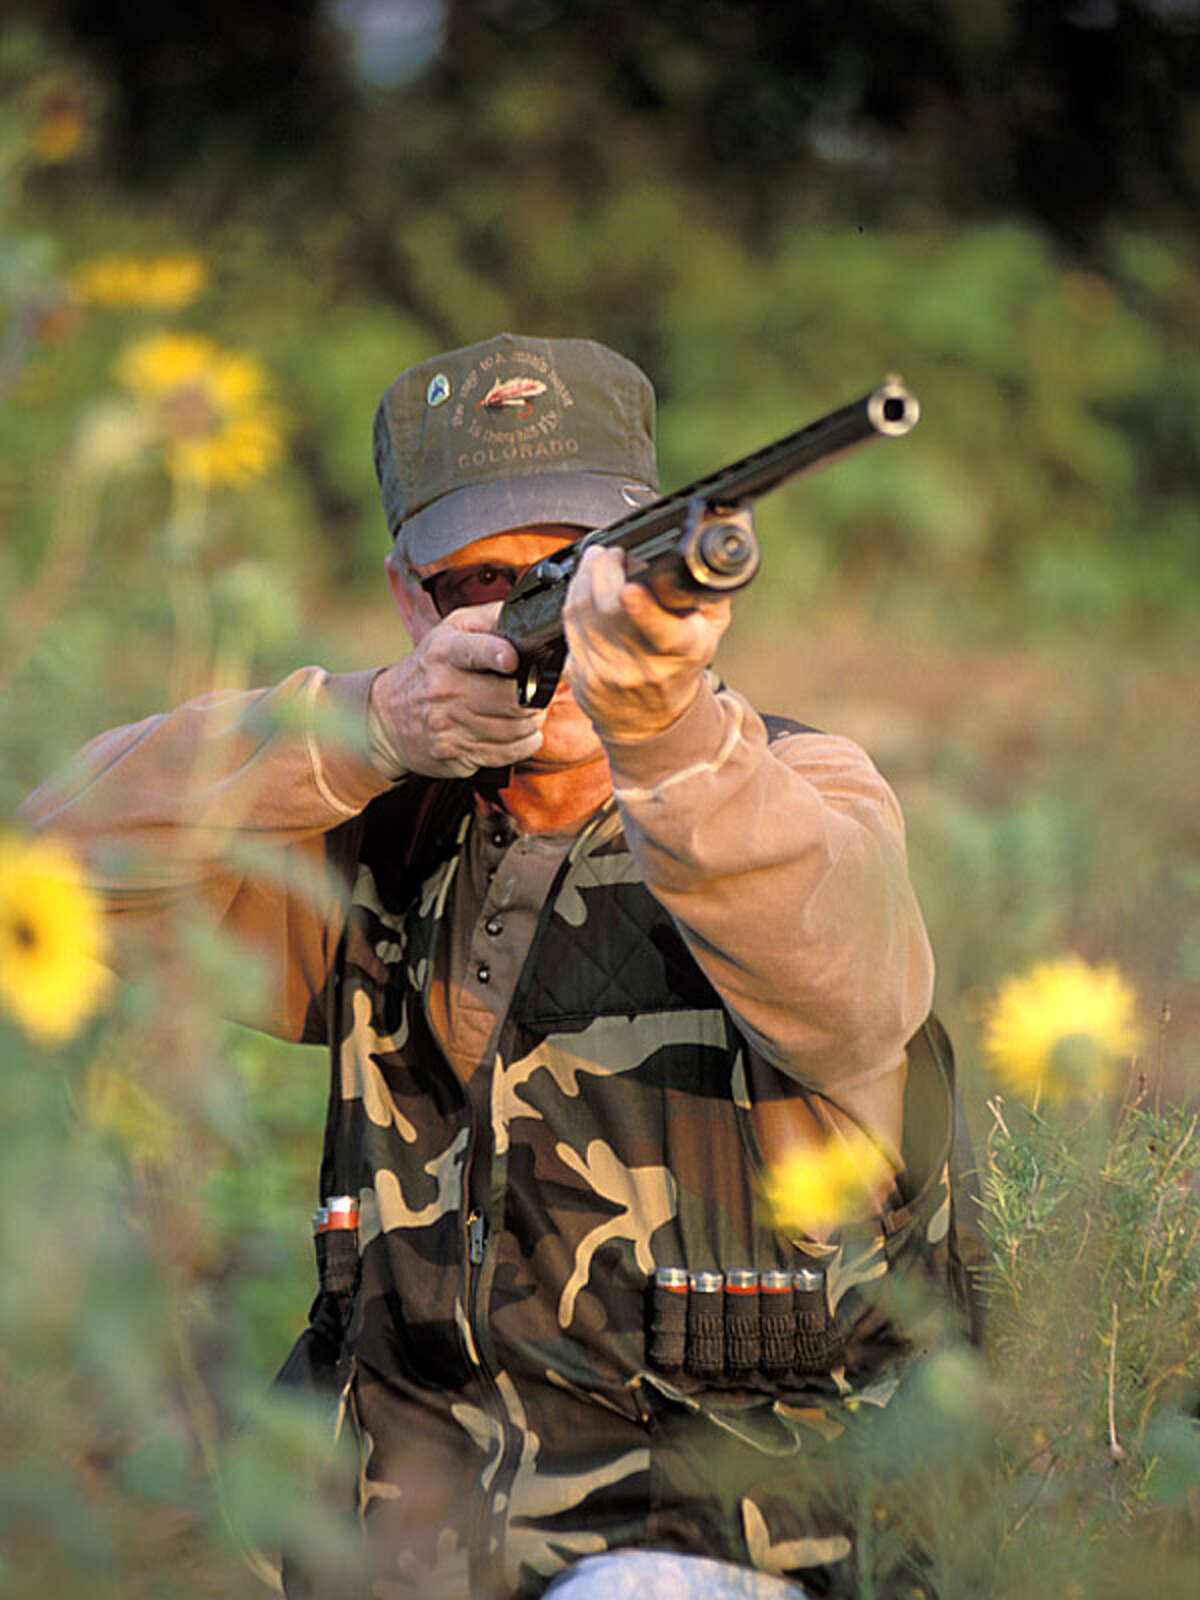 Dove season will open on Sept. 14 in the South Zone, the earliest start date for the region since 1950.